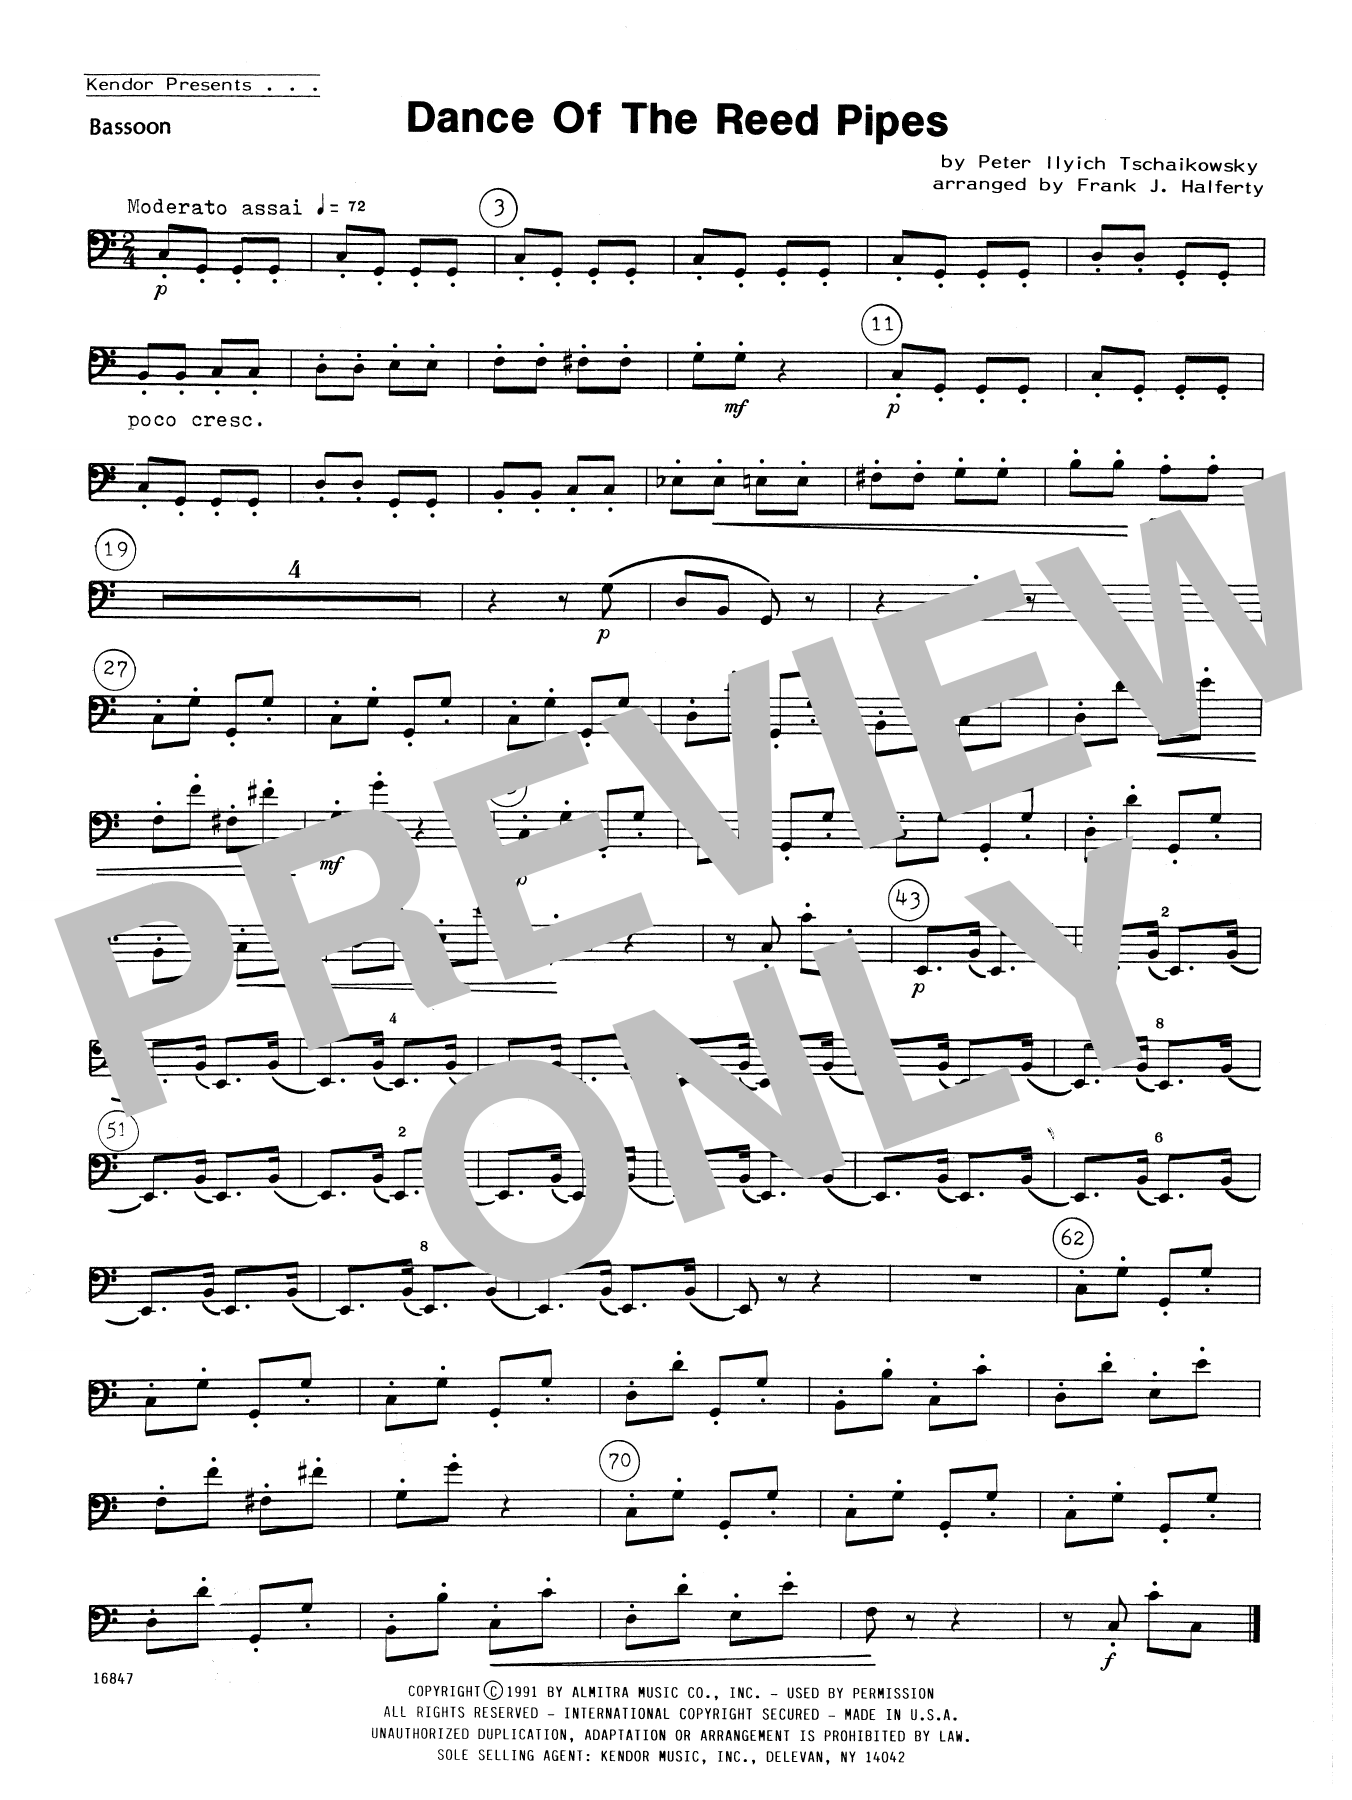 Download Frank J. Halferty Dance Of The Reed Pipes - Bassoon Sheet Music